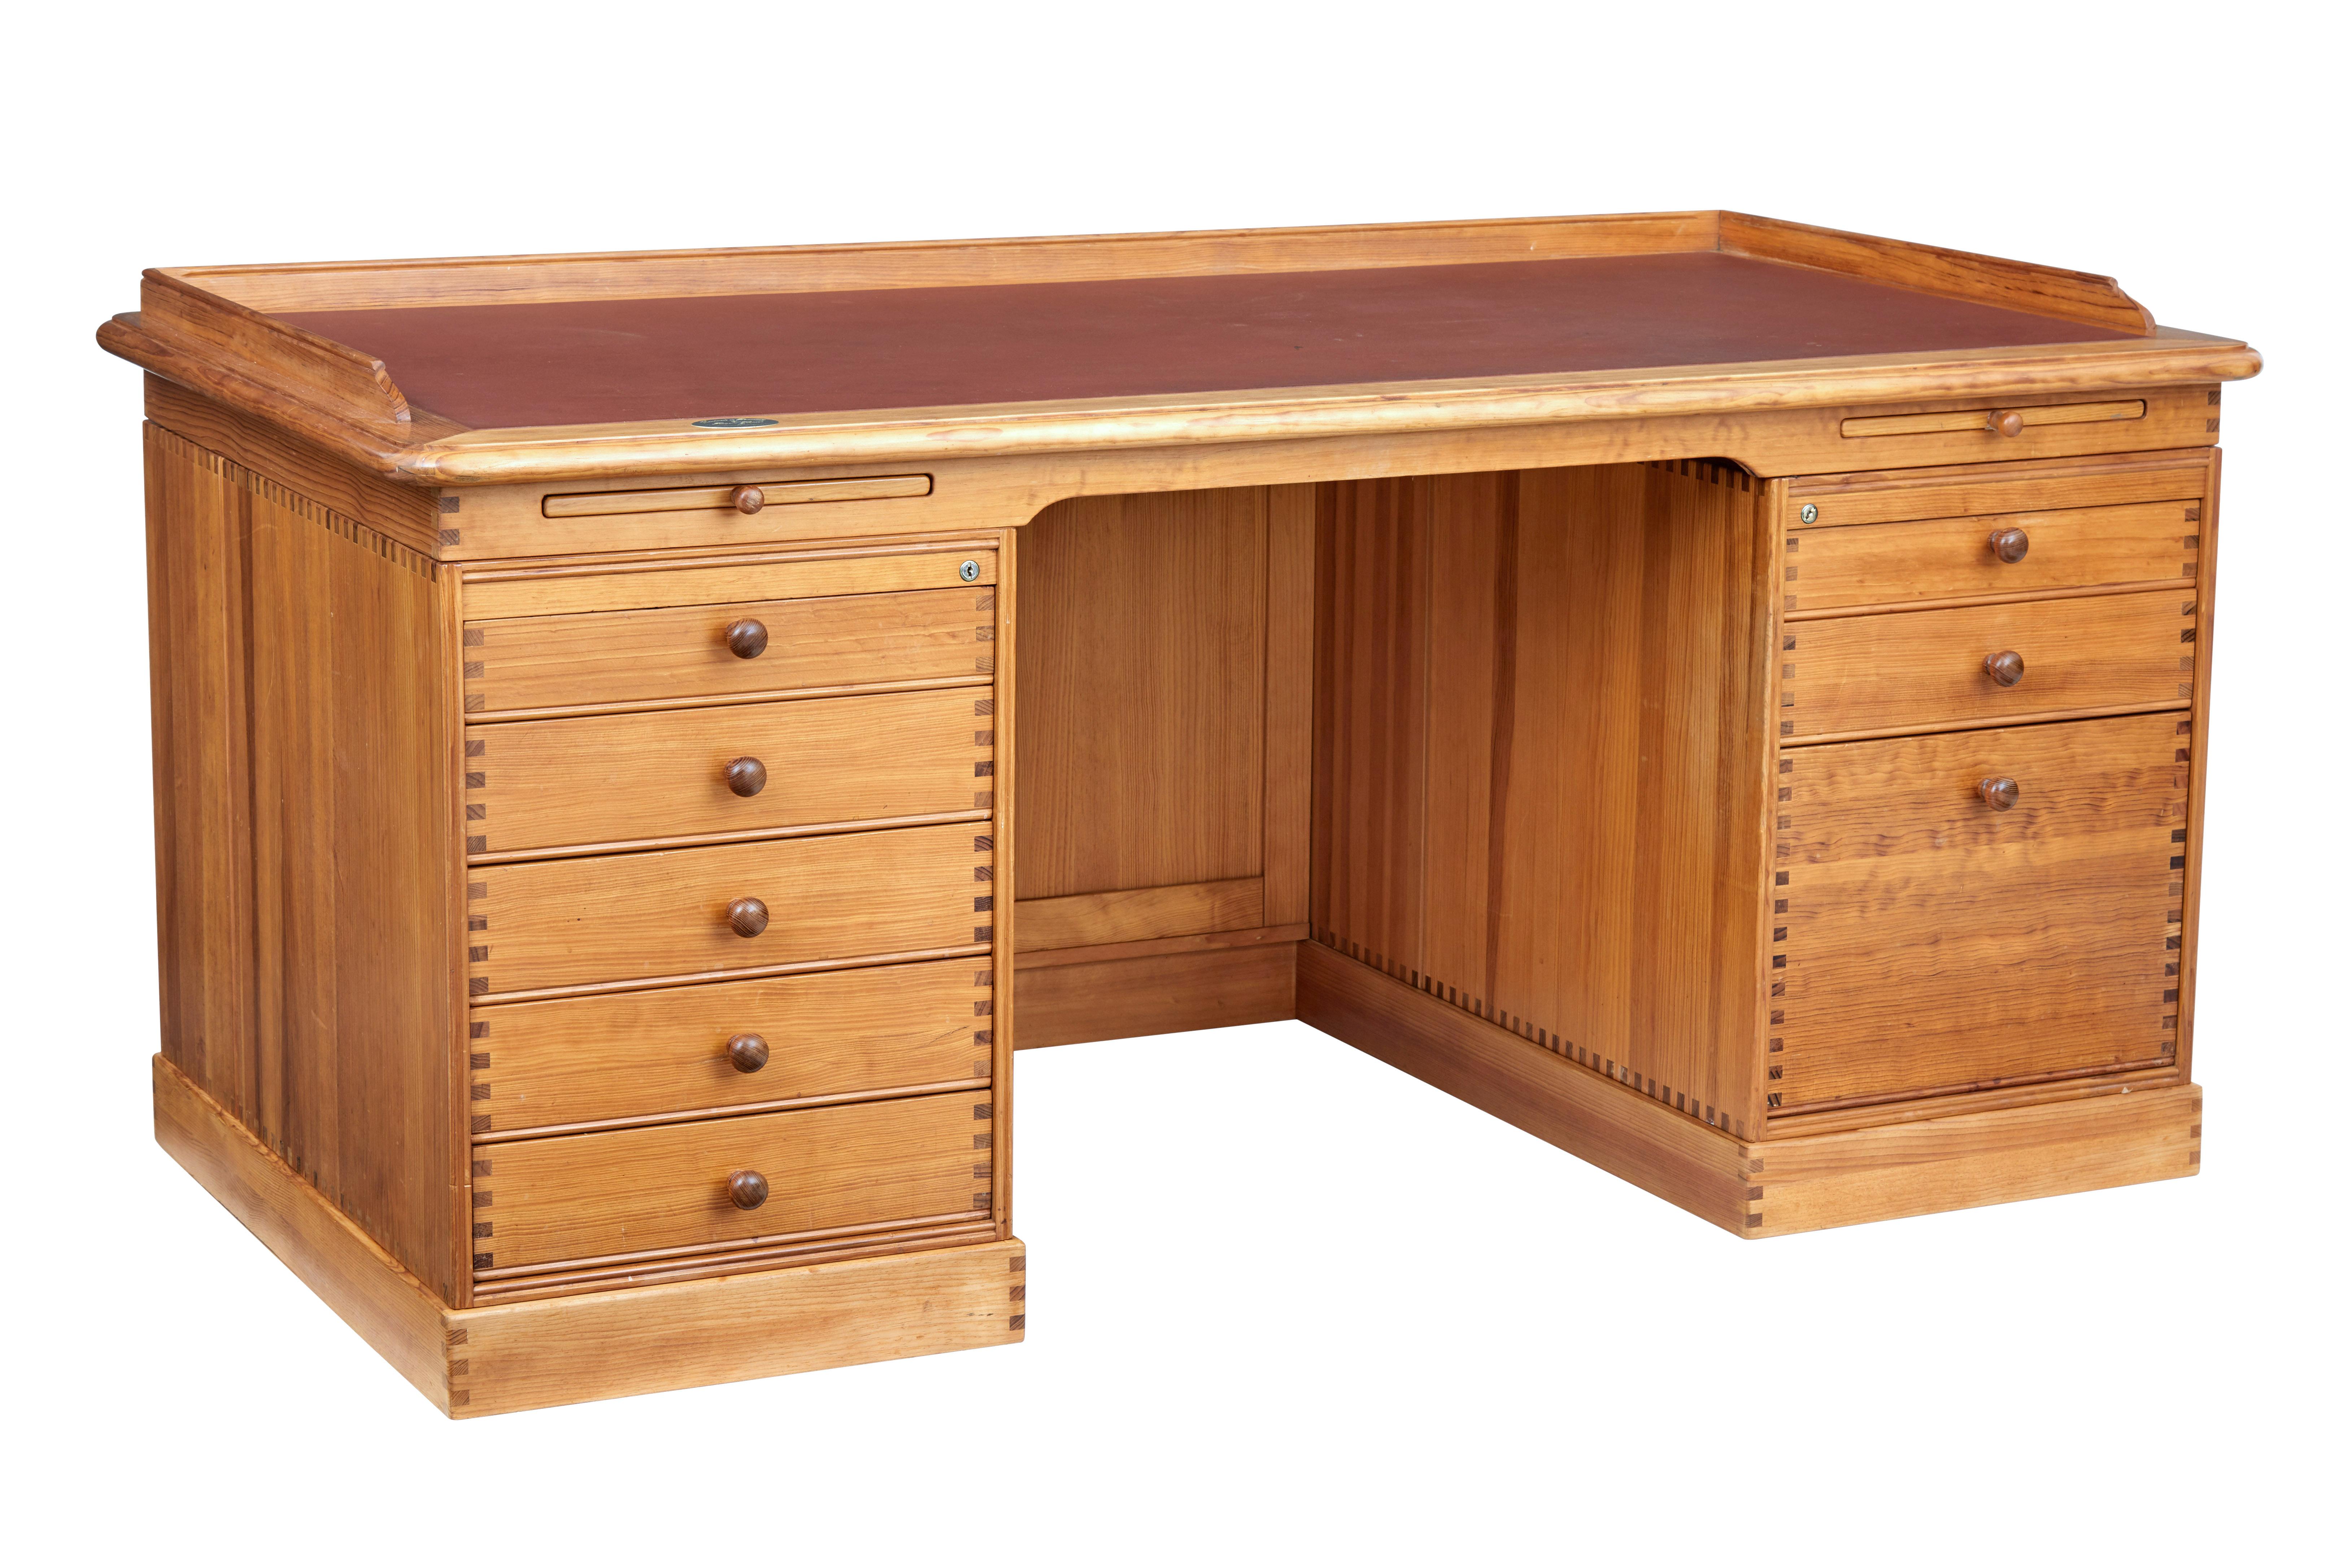 Large pine desk designed by Finn N Hansen, made by Hadsten Traeindustri of Denmark, circa 1992.

These desks were specially made with a brass plaque showing the customers name, ours baring the name of Johannes Skjaerris.

Desk comprises of 5